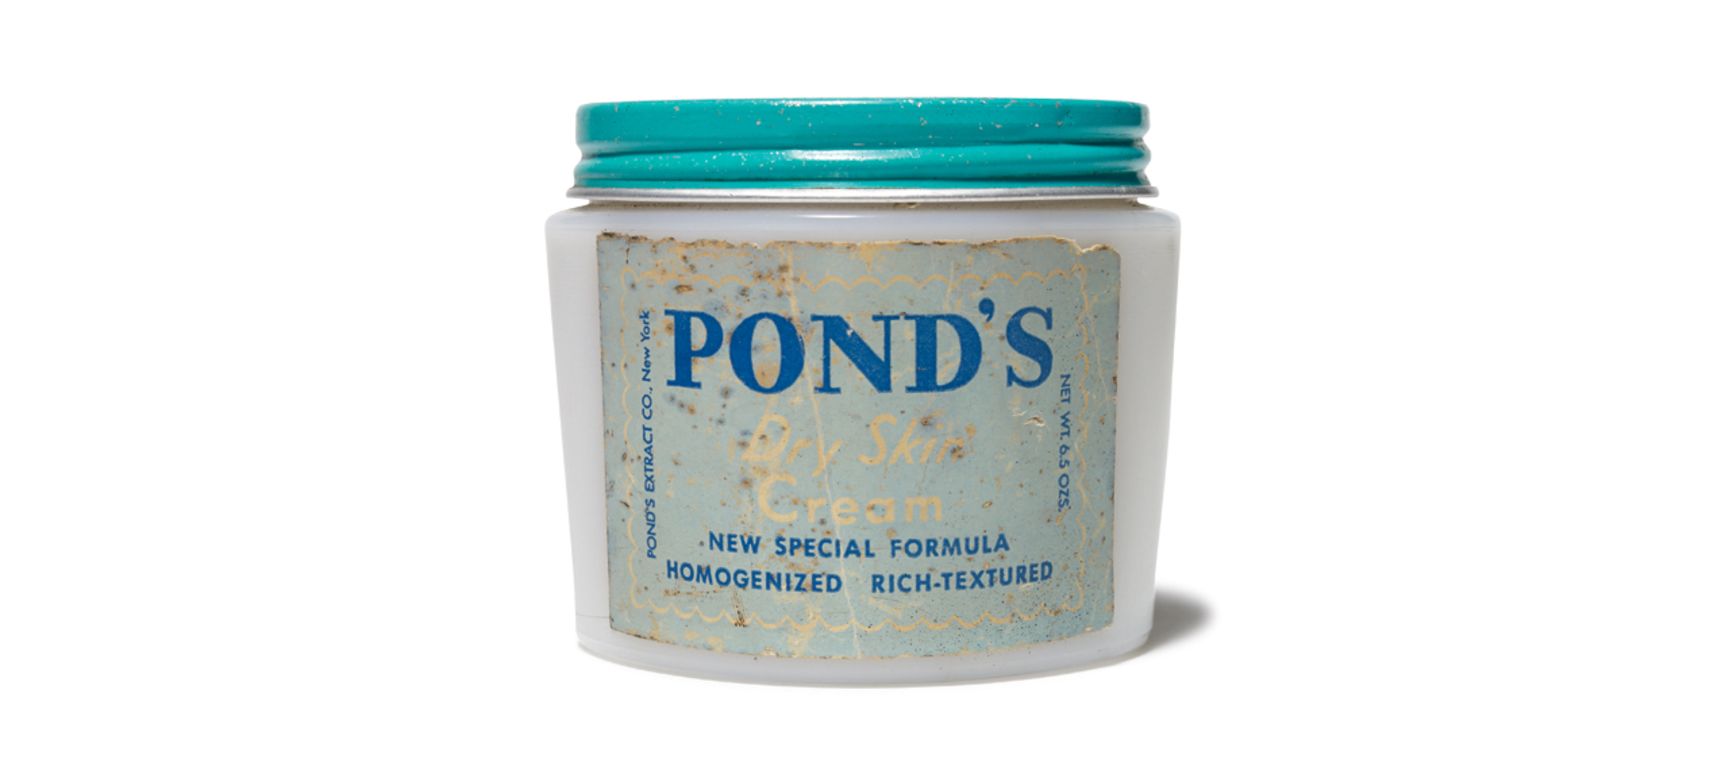 Kylie Minogue is a fan of Pond's.